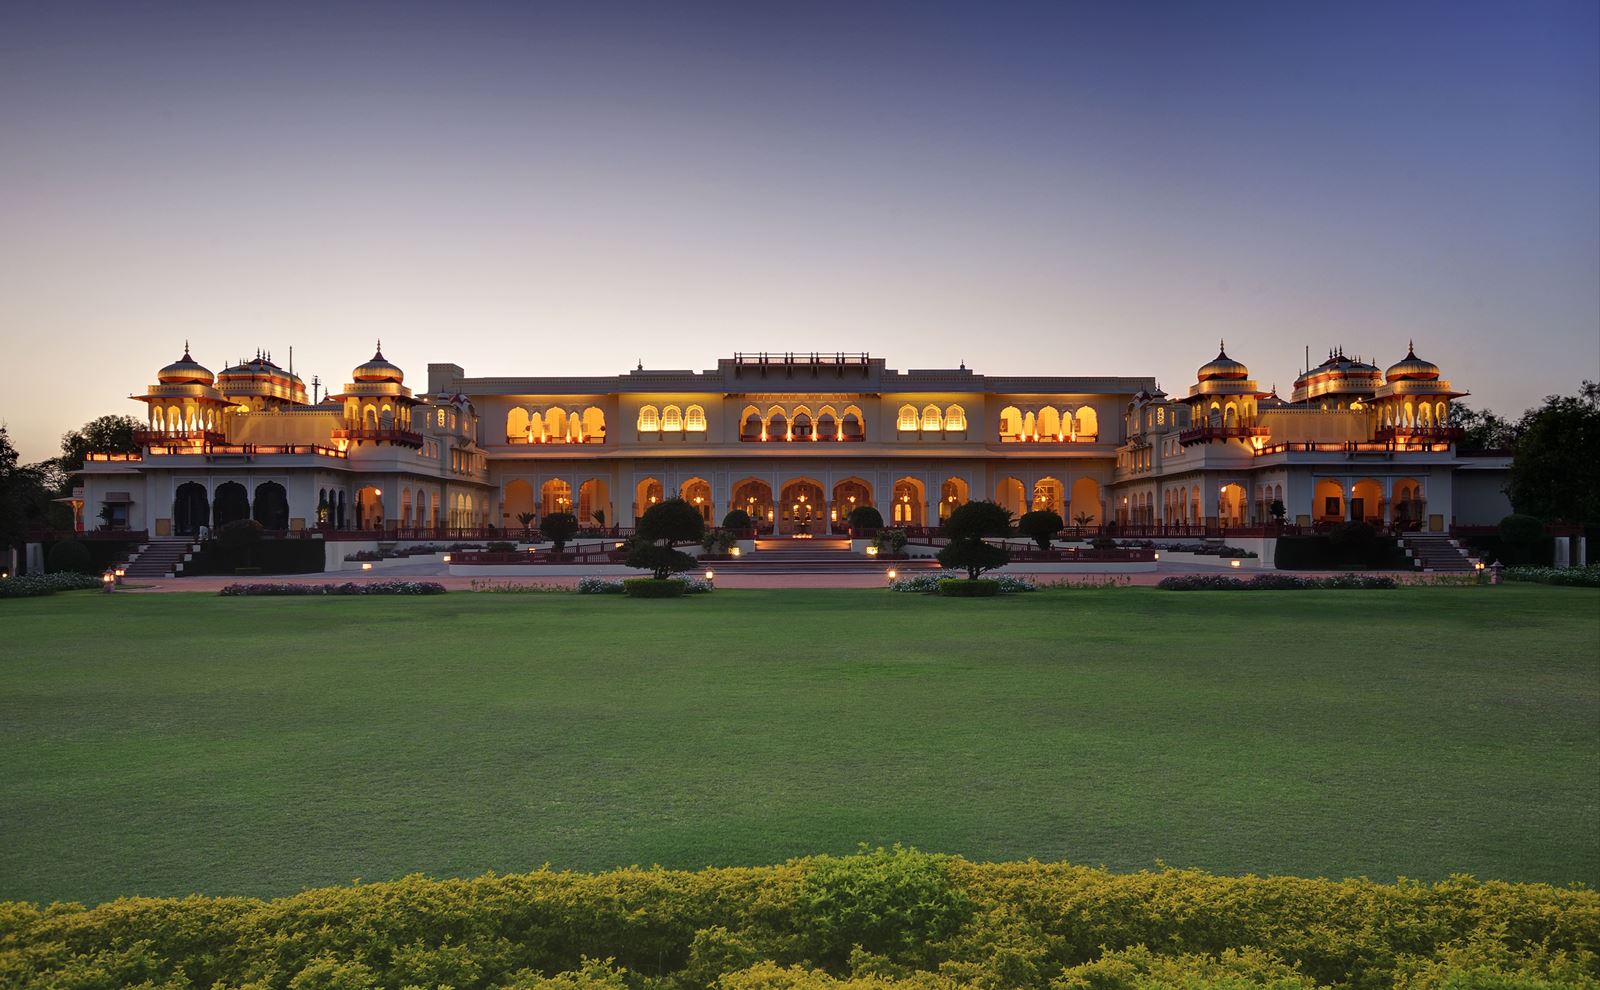 The exterior of  Rambagh Palace in India by night